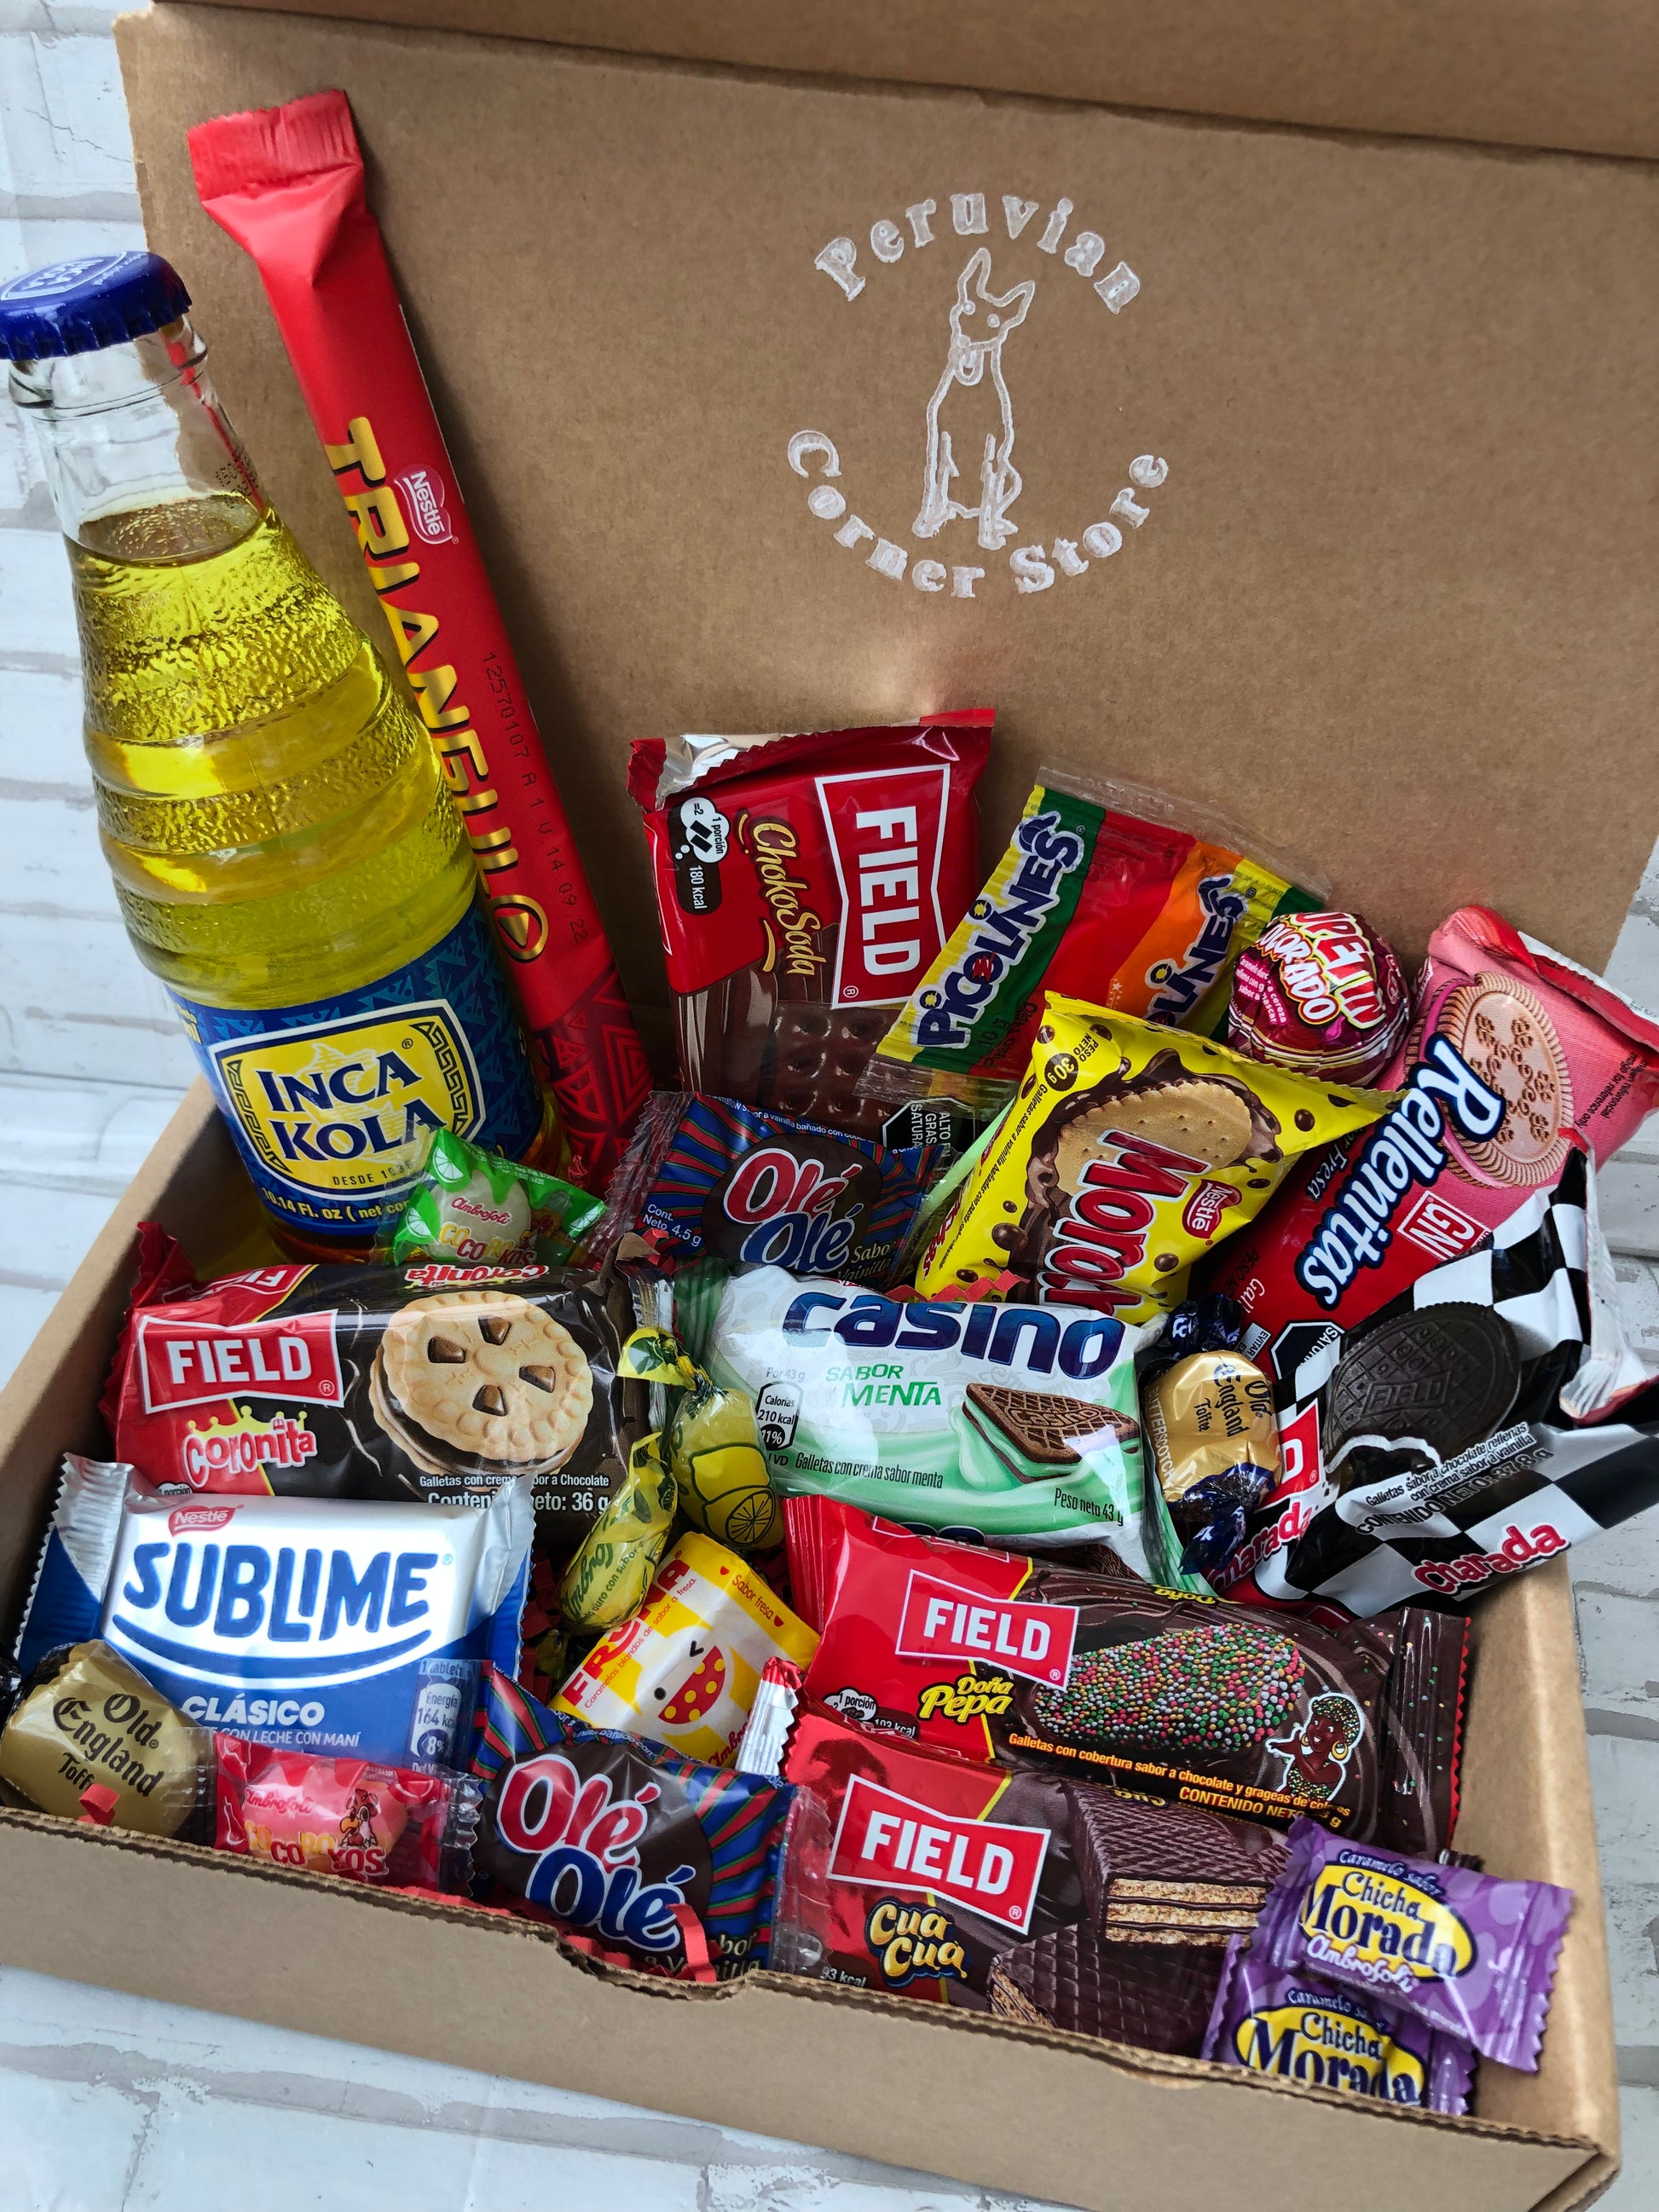 Peruvian Candy Box With Assortments Cookies Chocolates Candies & Inka Kola  Soda Sweet Treats From Peru Small Candy Gift Box With 22 Items 